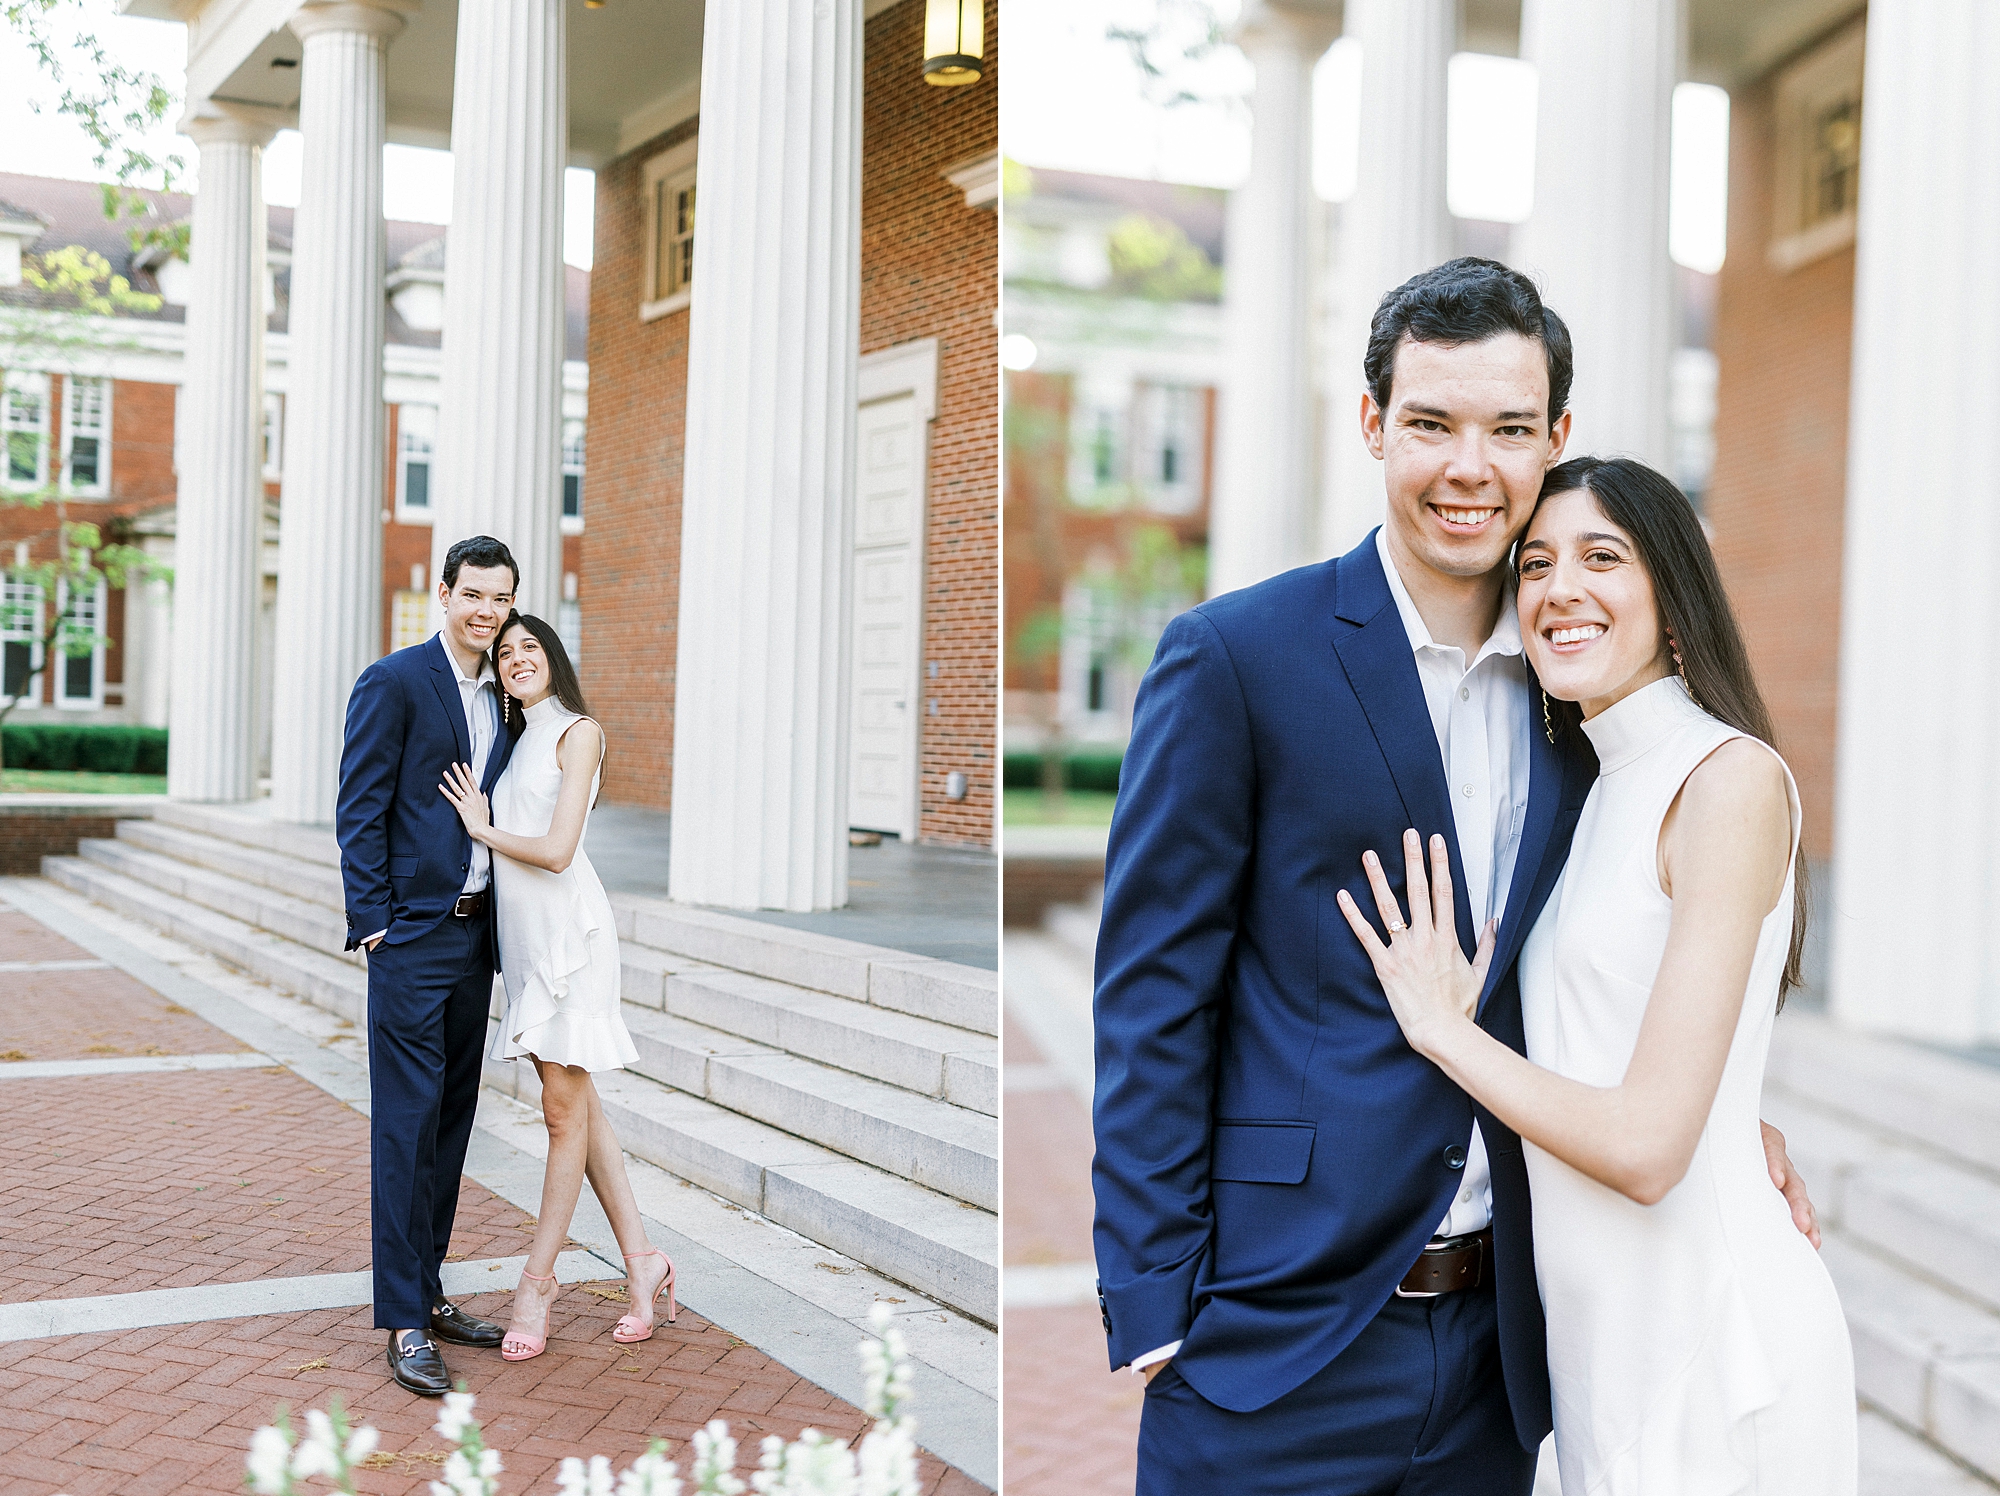 spring Queens University engagement session for young couple